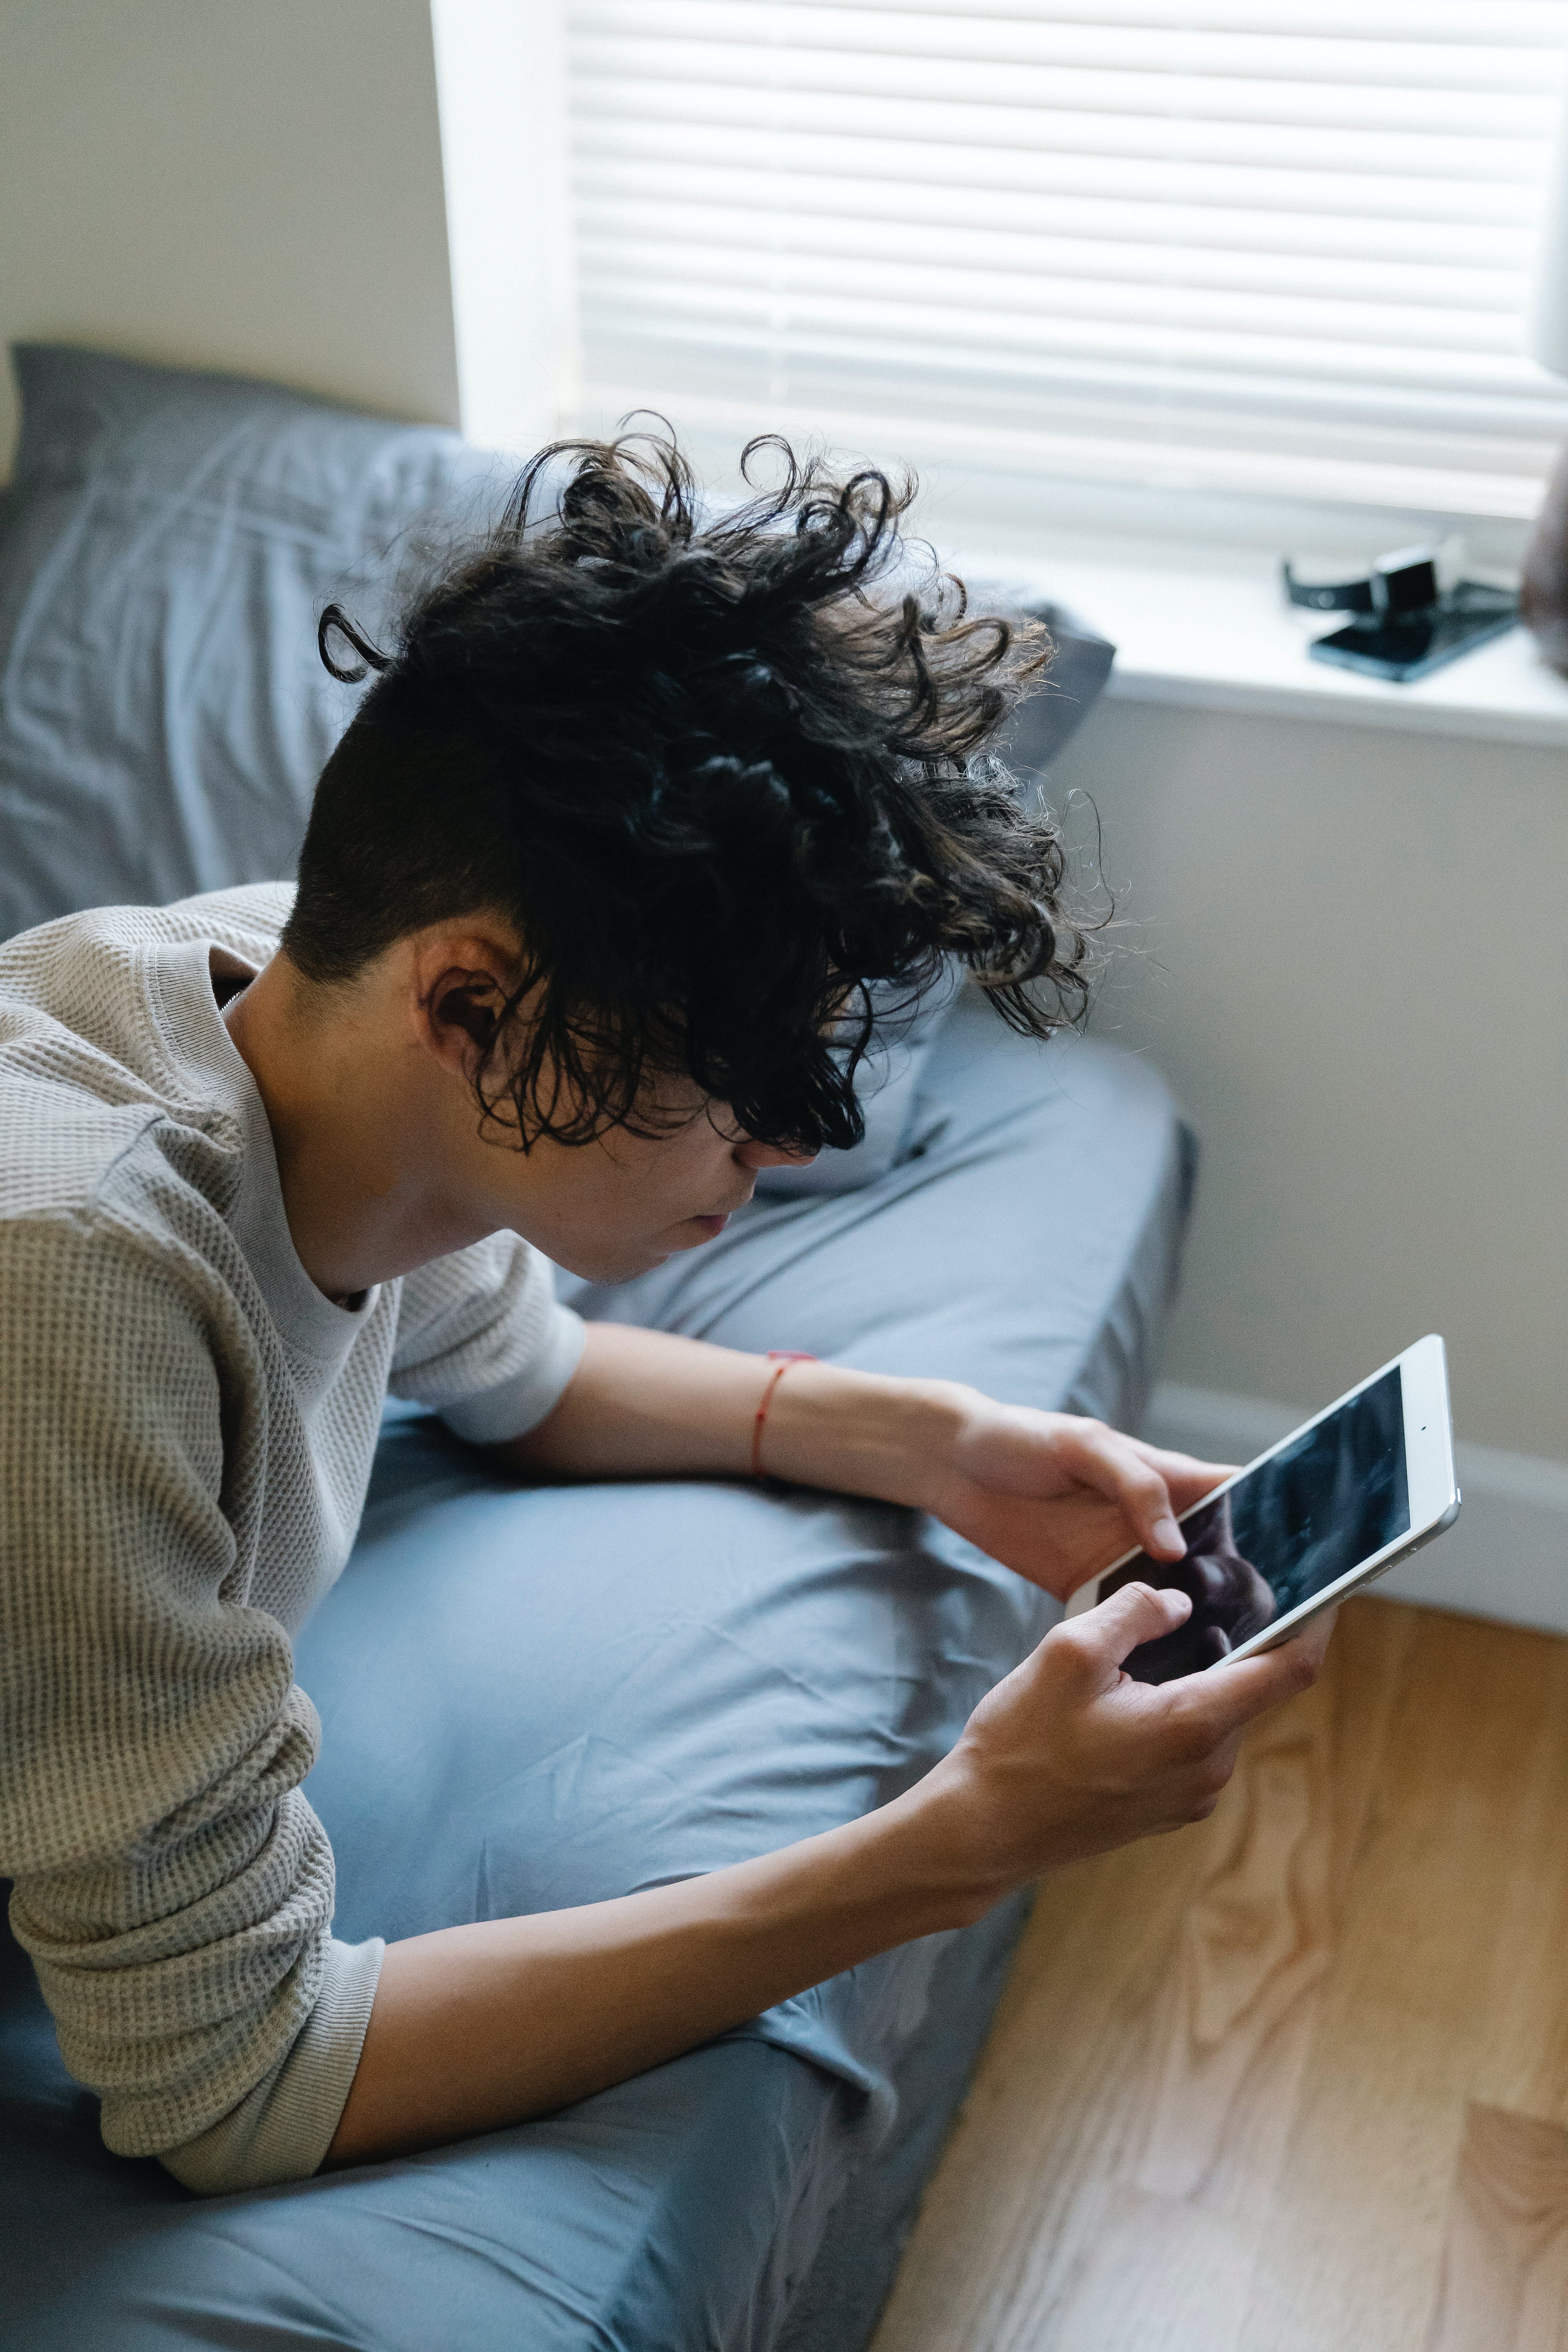 A young man texting on a phone while lying on a bed | Source: Pexels